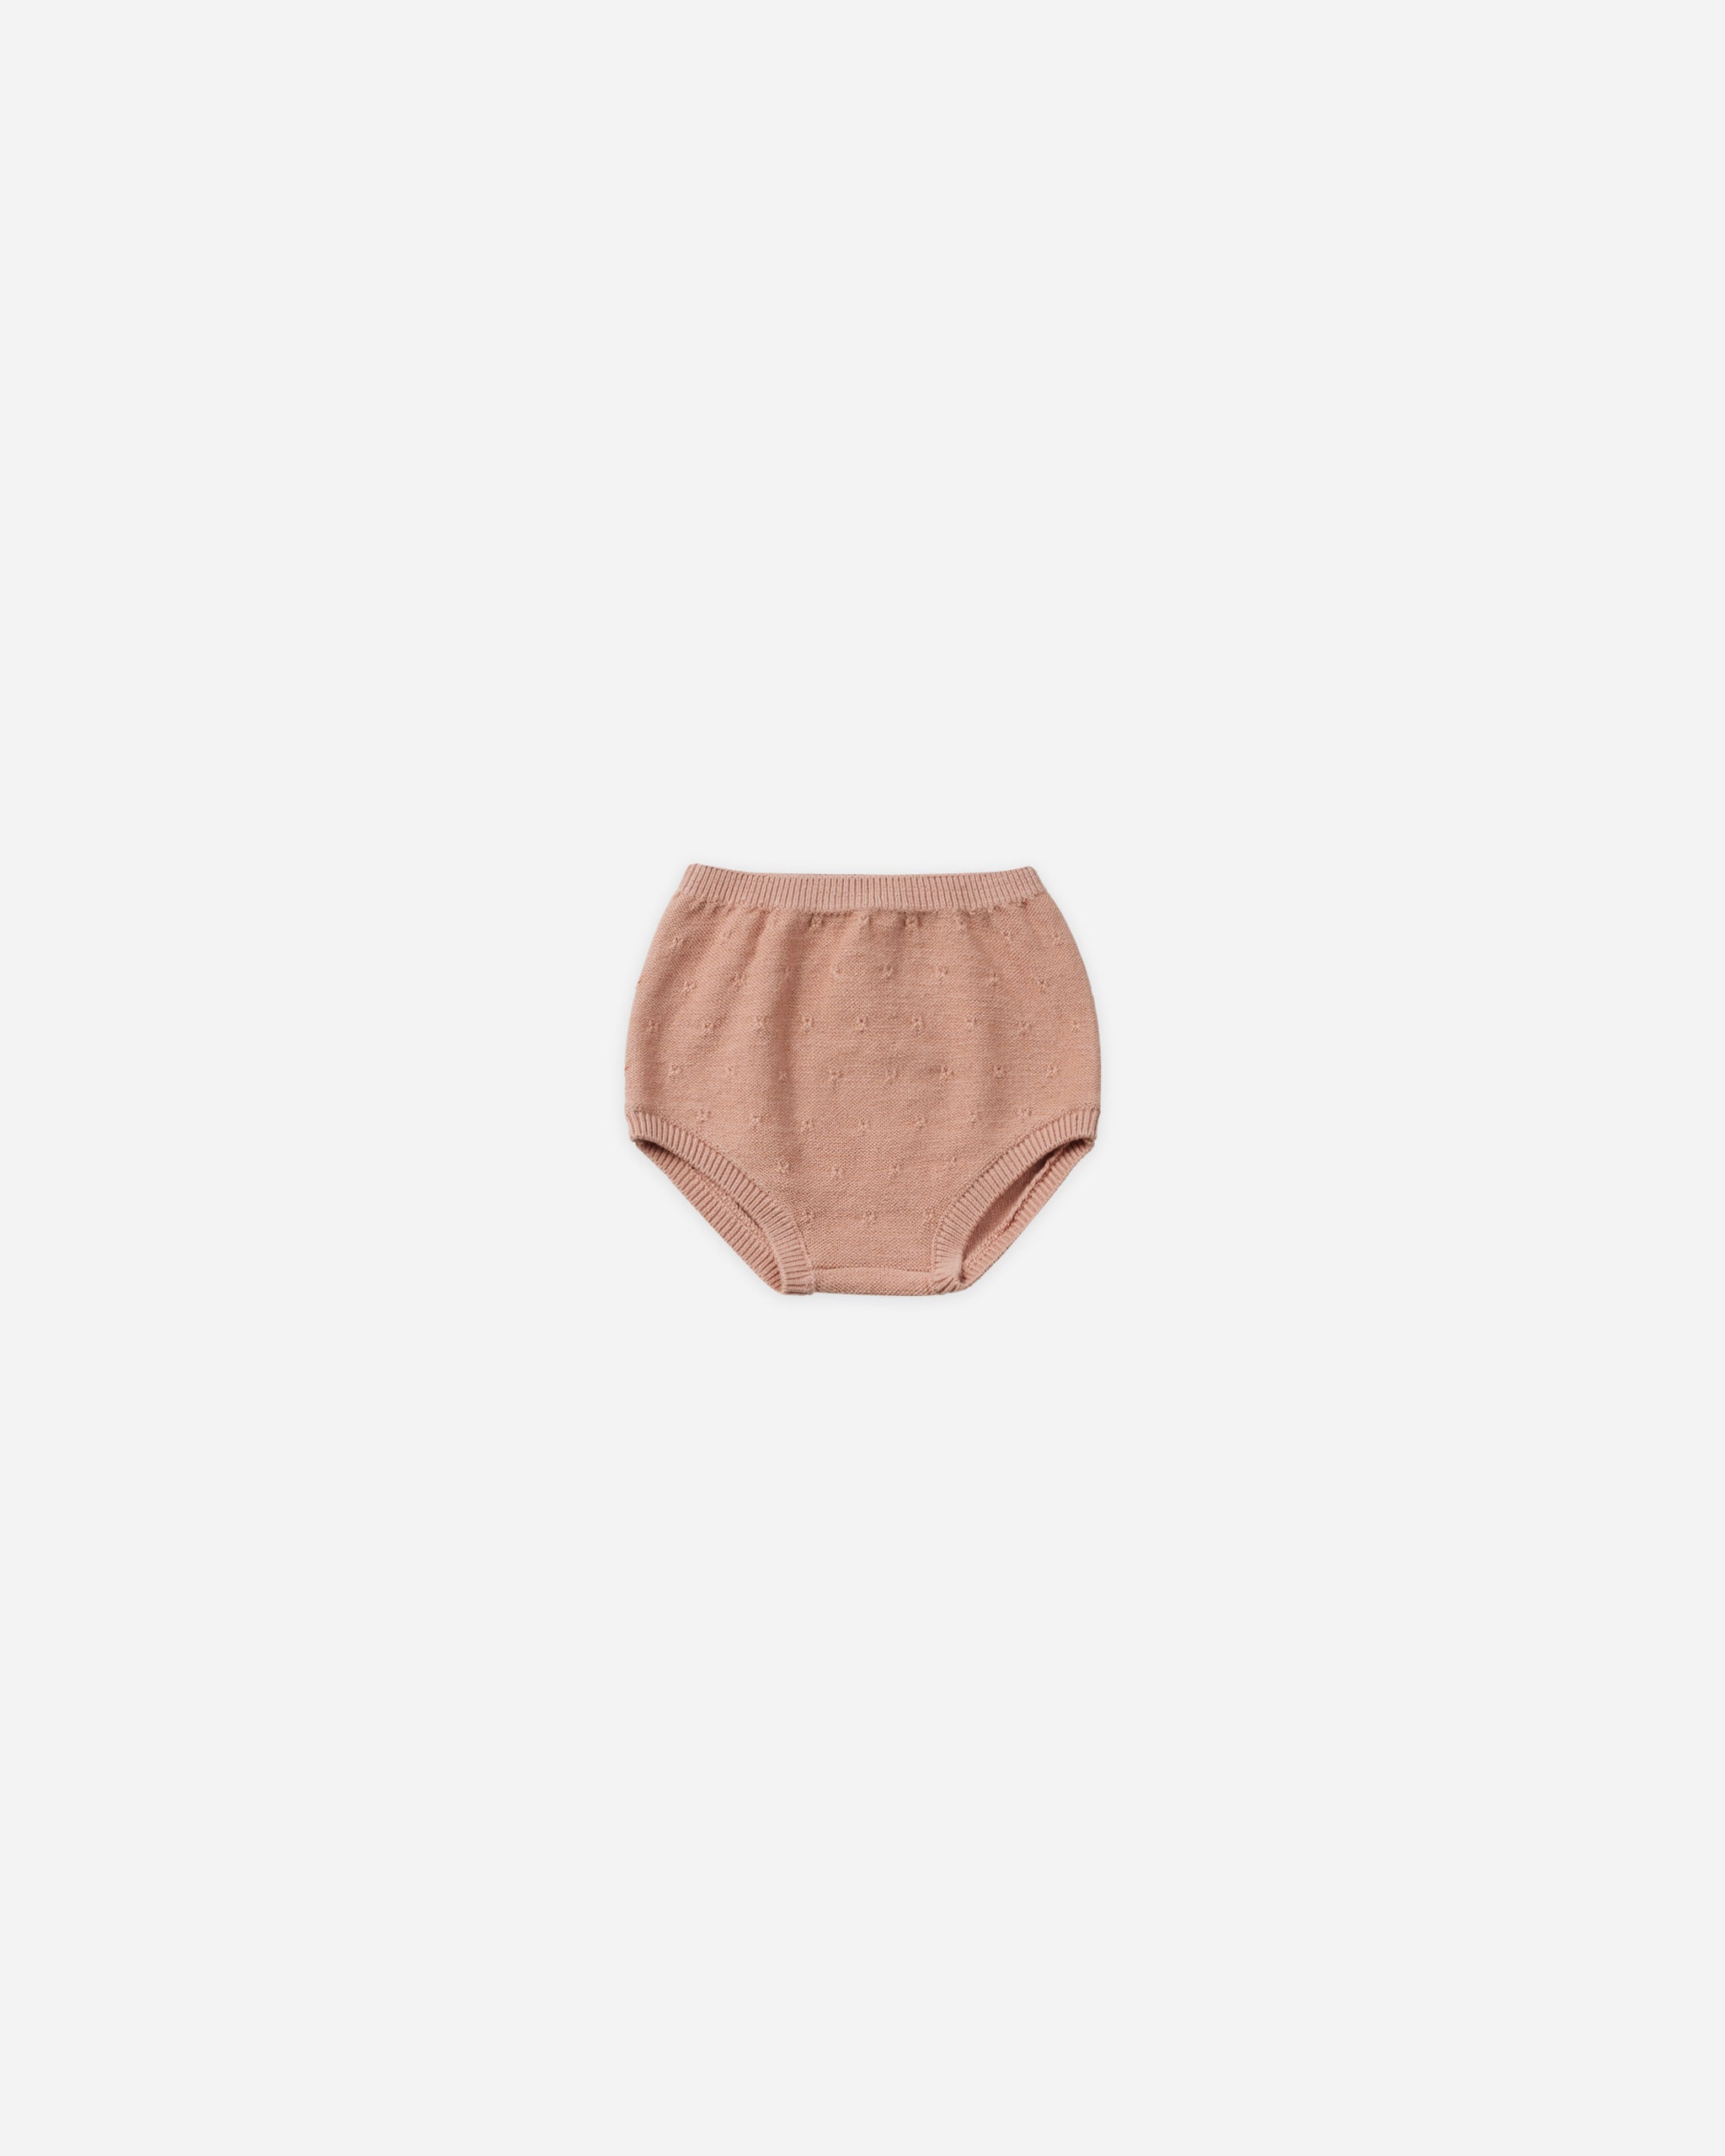 Knit Bloomer || Rose - Rylee + Cru | Kids Clothes | Trendy Baby Clothes | Modern Infant Outfits |